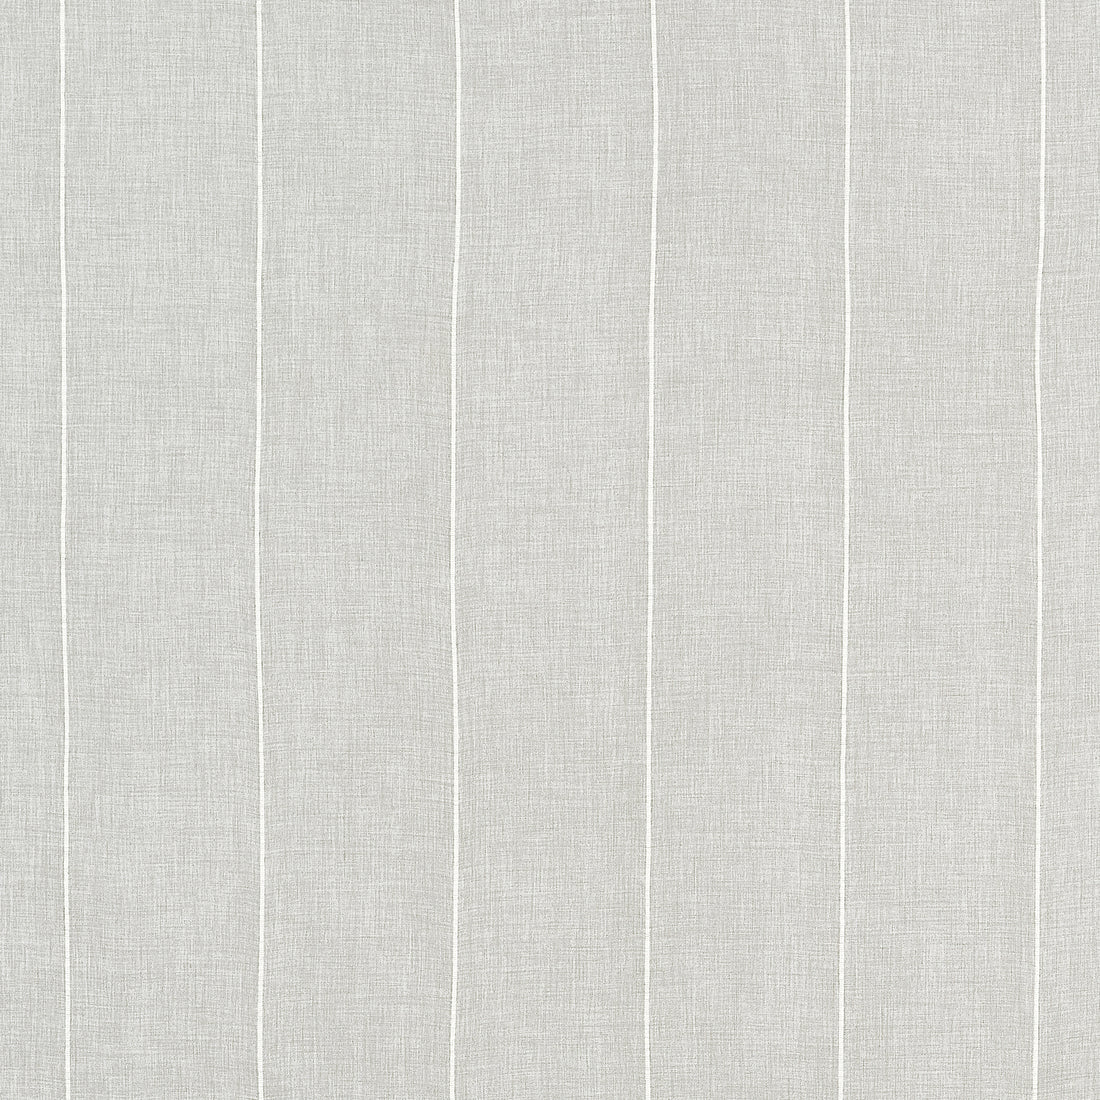 Crestline fabric in sterling color - pattern number FWW81739 - by Thibaut in the Locale Wide Width collection